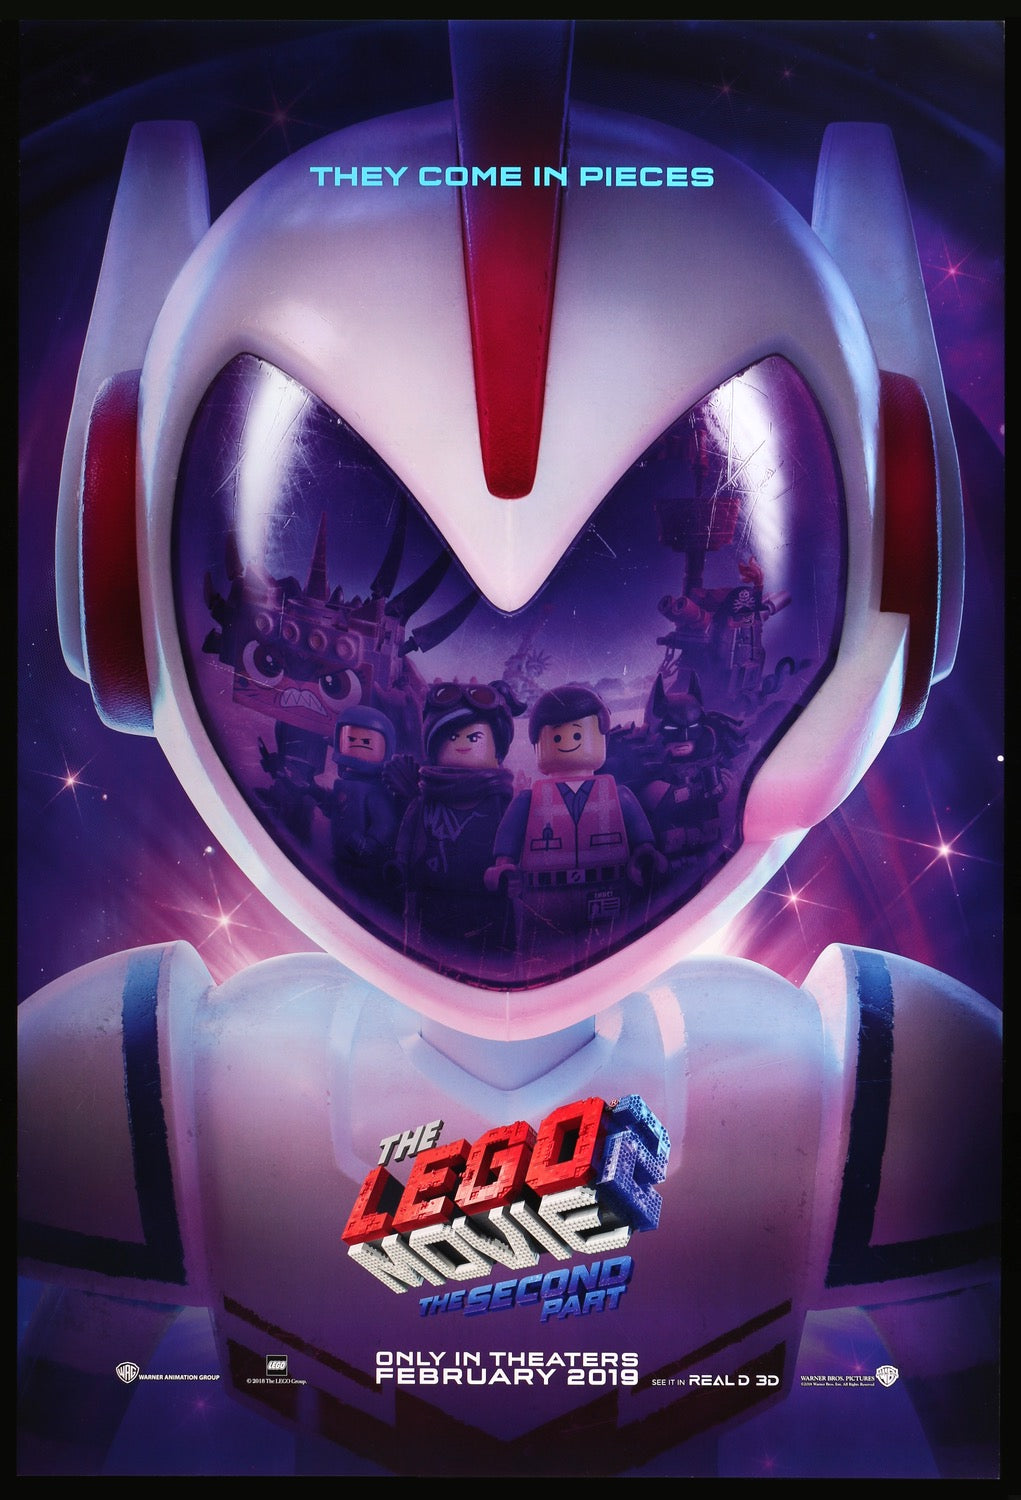 Lego Movie - The Second Part (2019) One-Sheet Movie Poster - Original Film Art - Vintage Movie Posters